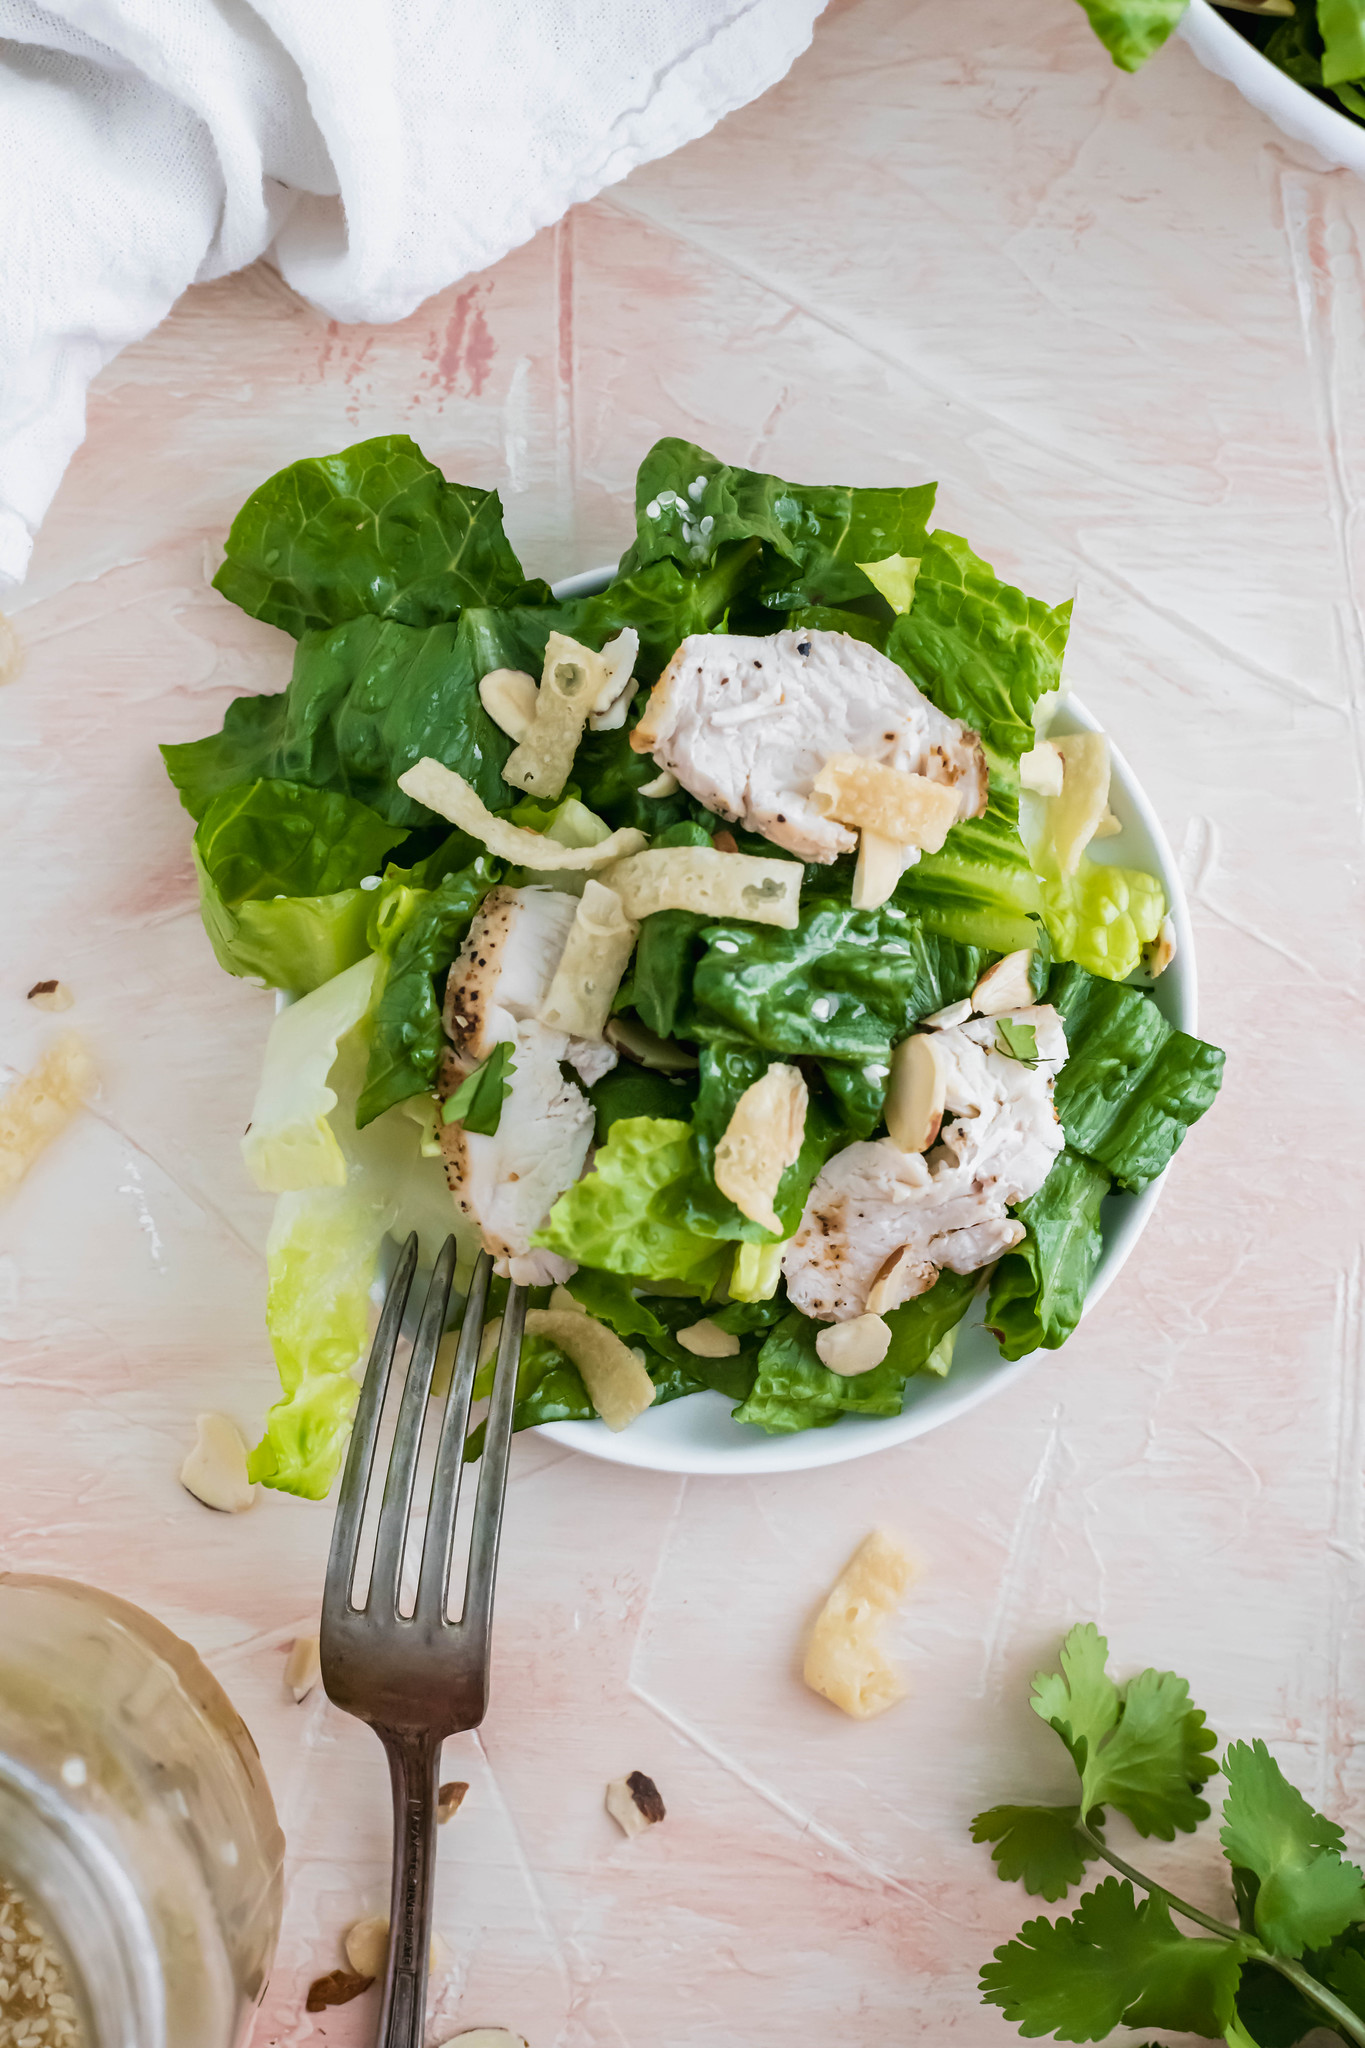 Make your favorite salad at home with this recipe for Panera's Asian Sesame Chicken Salad. It tastes JUST like the restaurant version at a fraction of the cost.